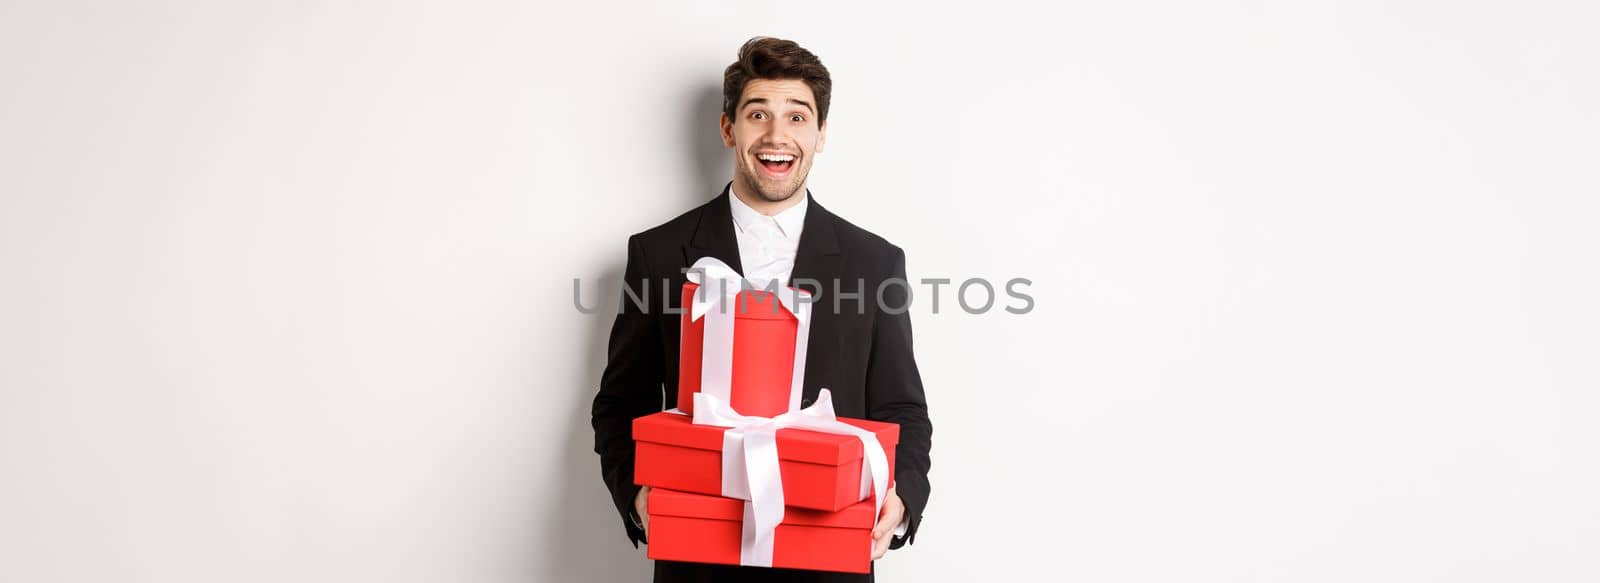 Concept of holidays, relationship and celebration. Handsome man in black suit bringing presents at new year party, holding gifts and smiling amused, standing against white background.